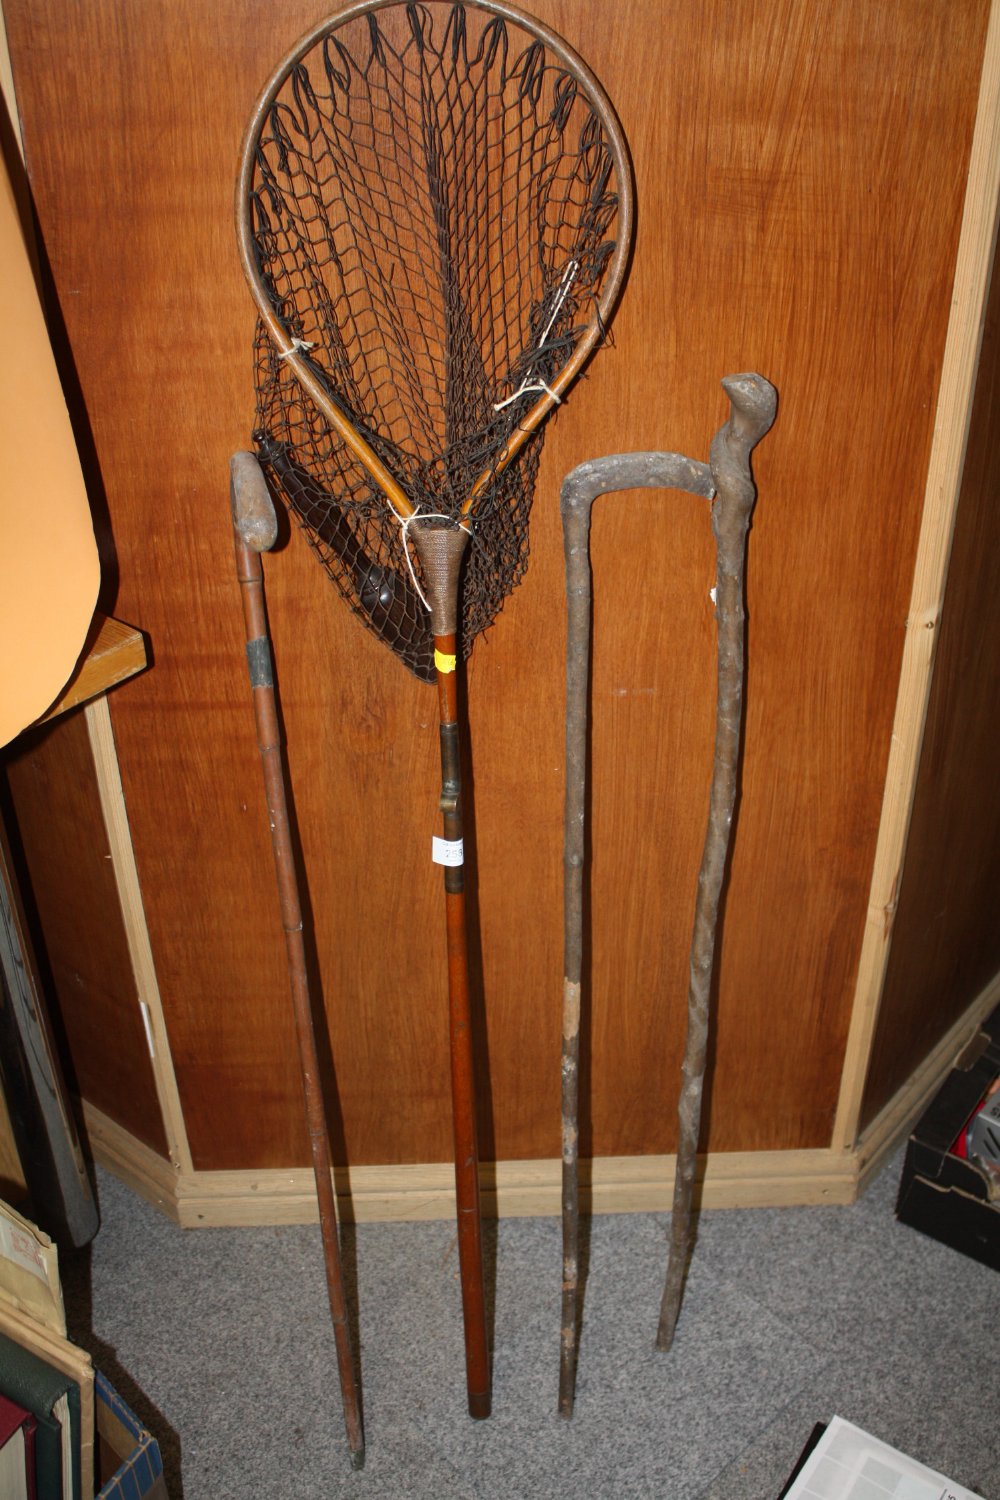 THREE VINTAGE WALKING STICKS, TOGETHER WITH A VINTAGE FISHING NET